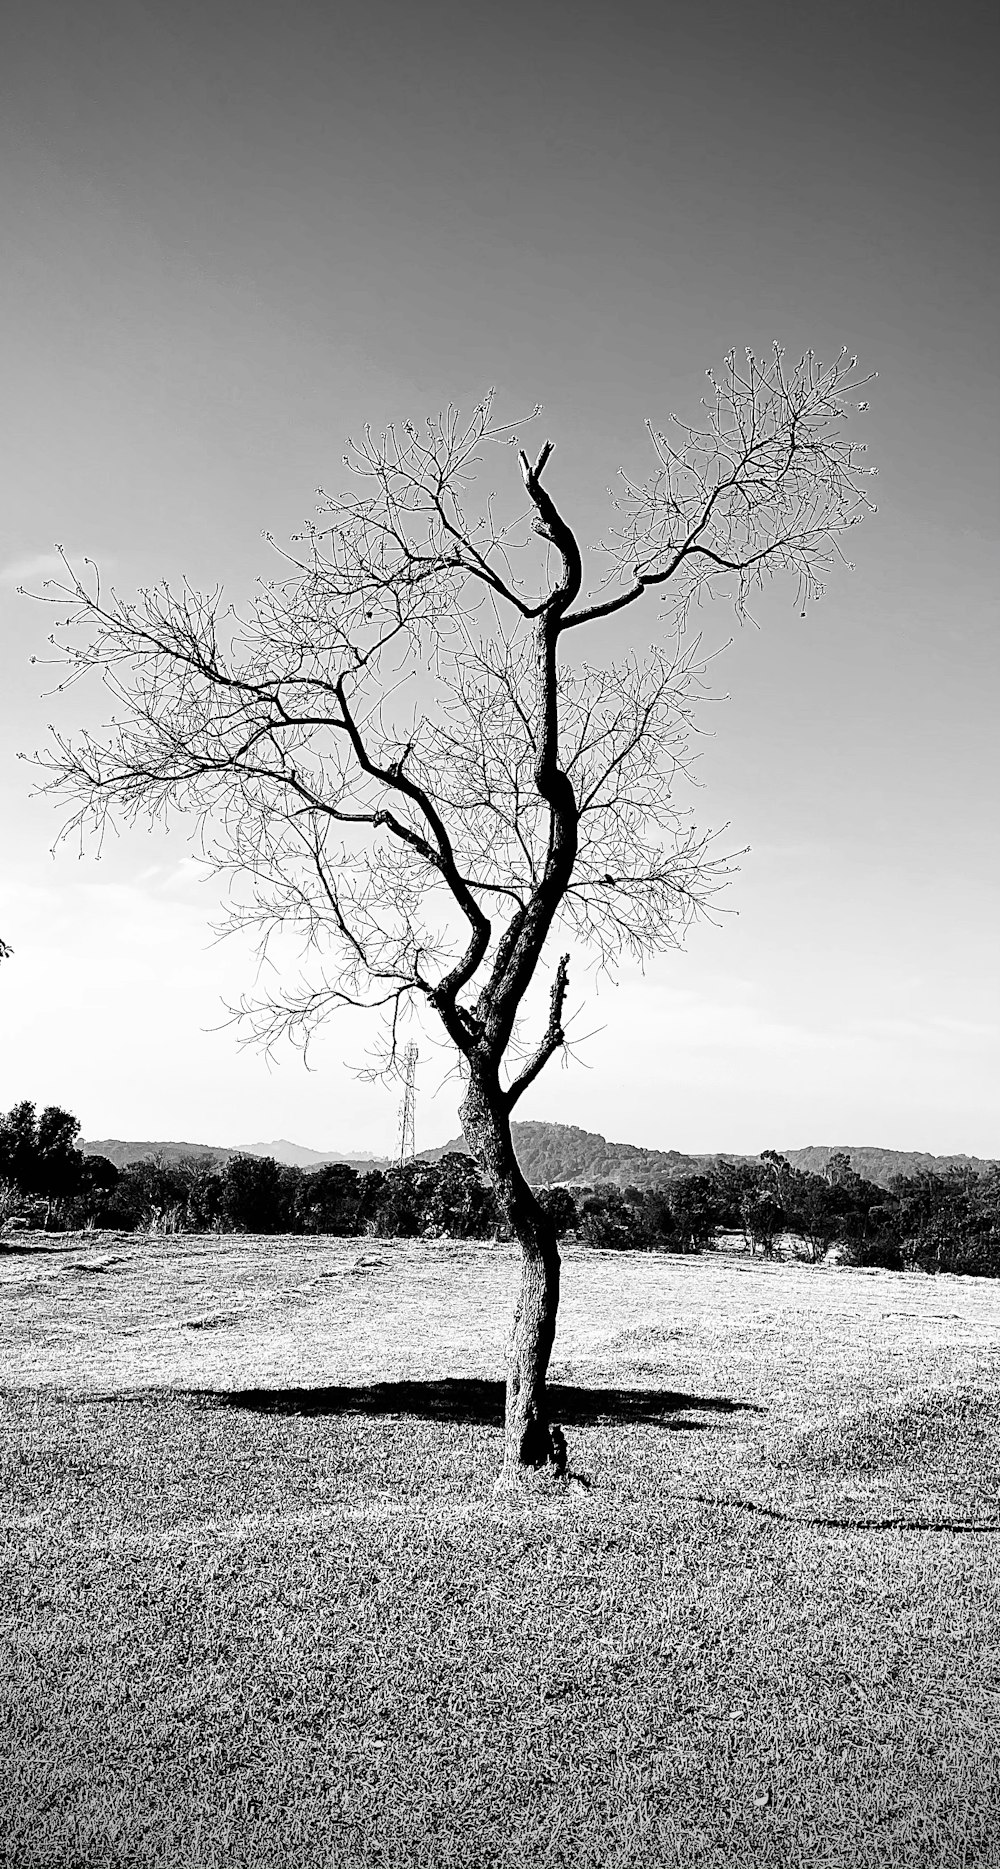 grayscale photo of leafless tree near body of water